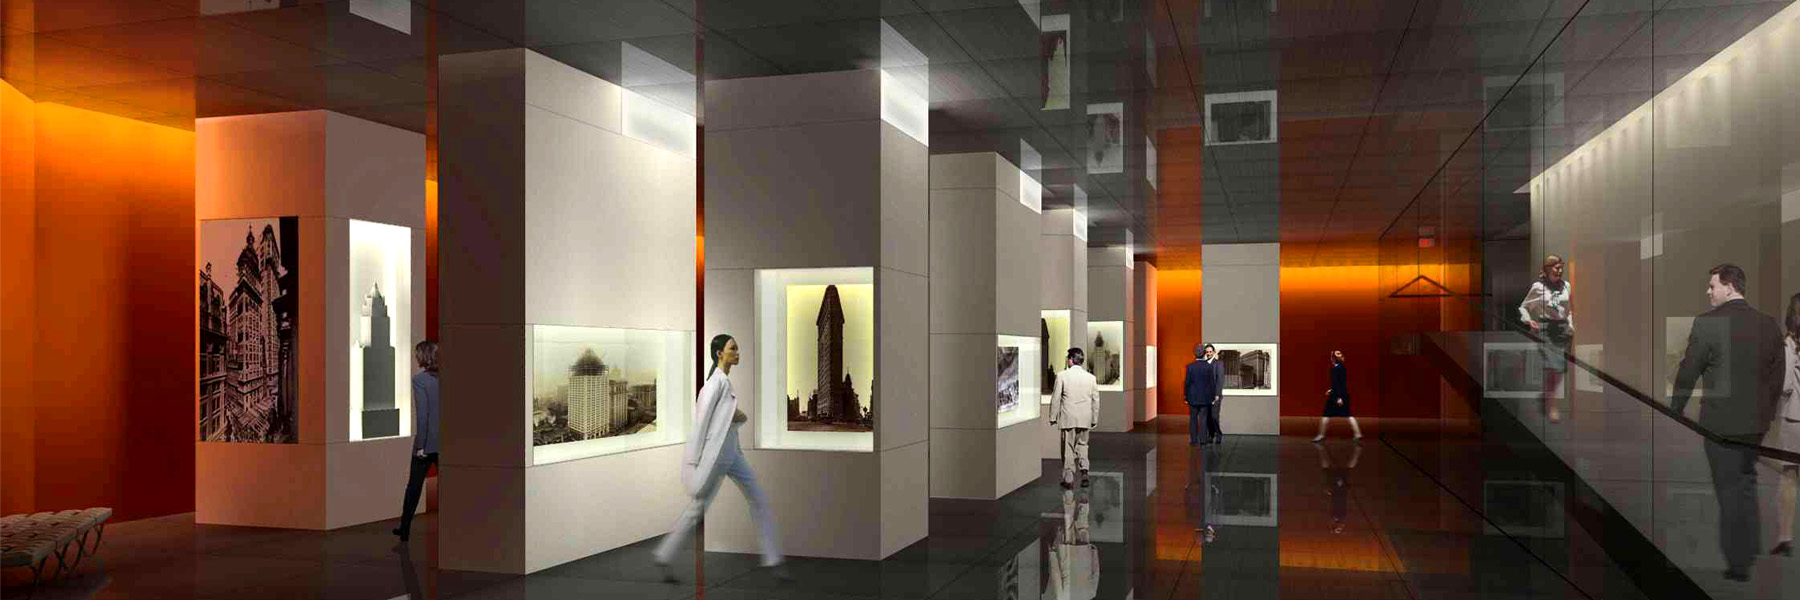 Interior rendering of the gallery at The Skyscraper Museum